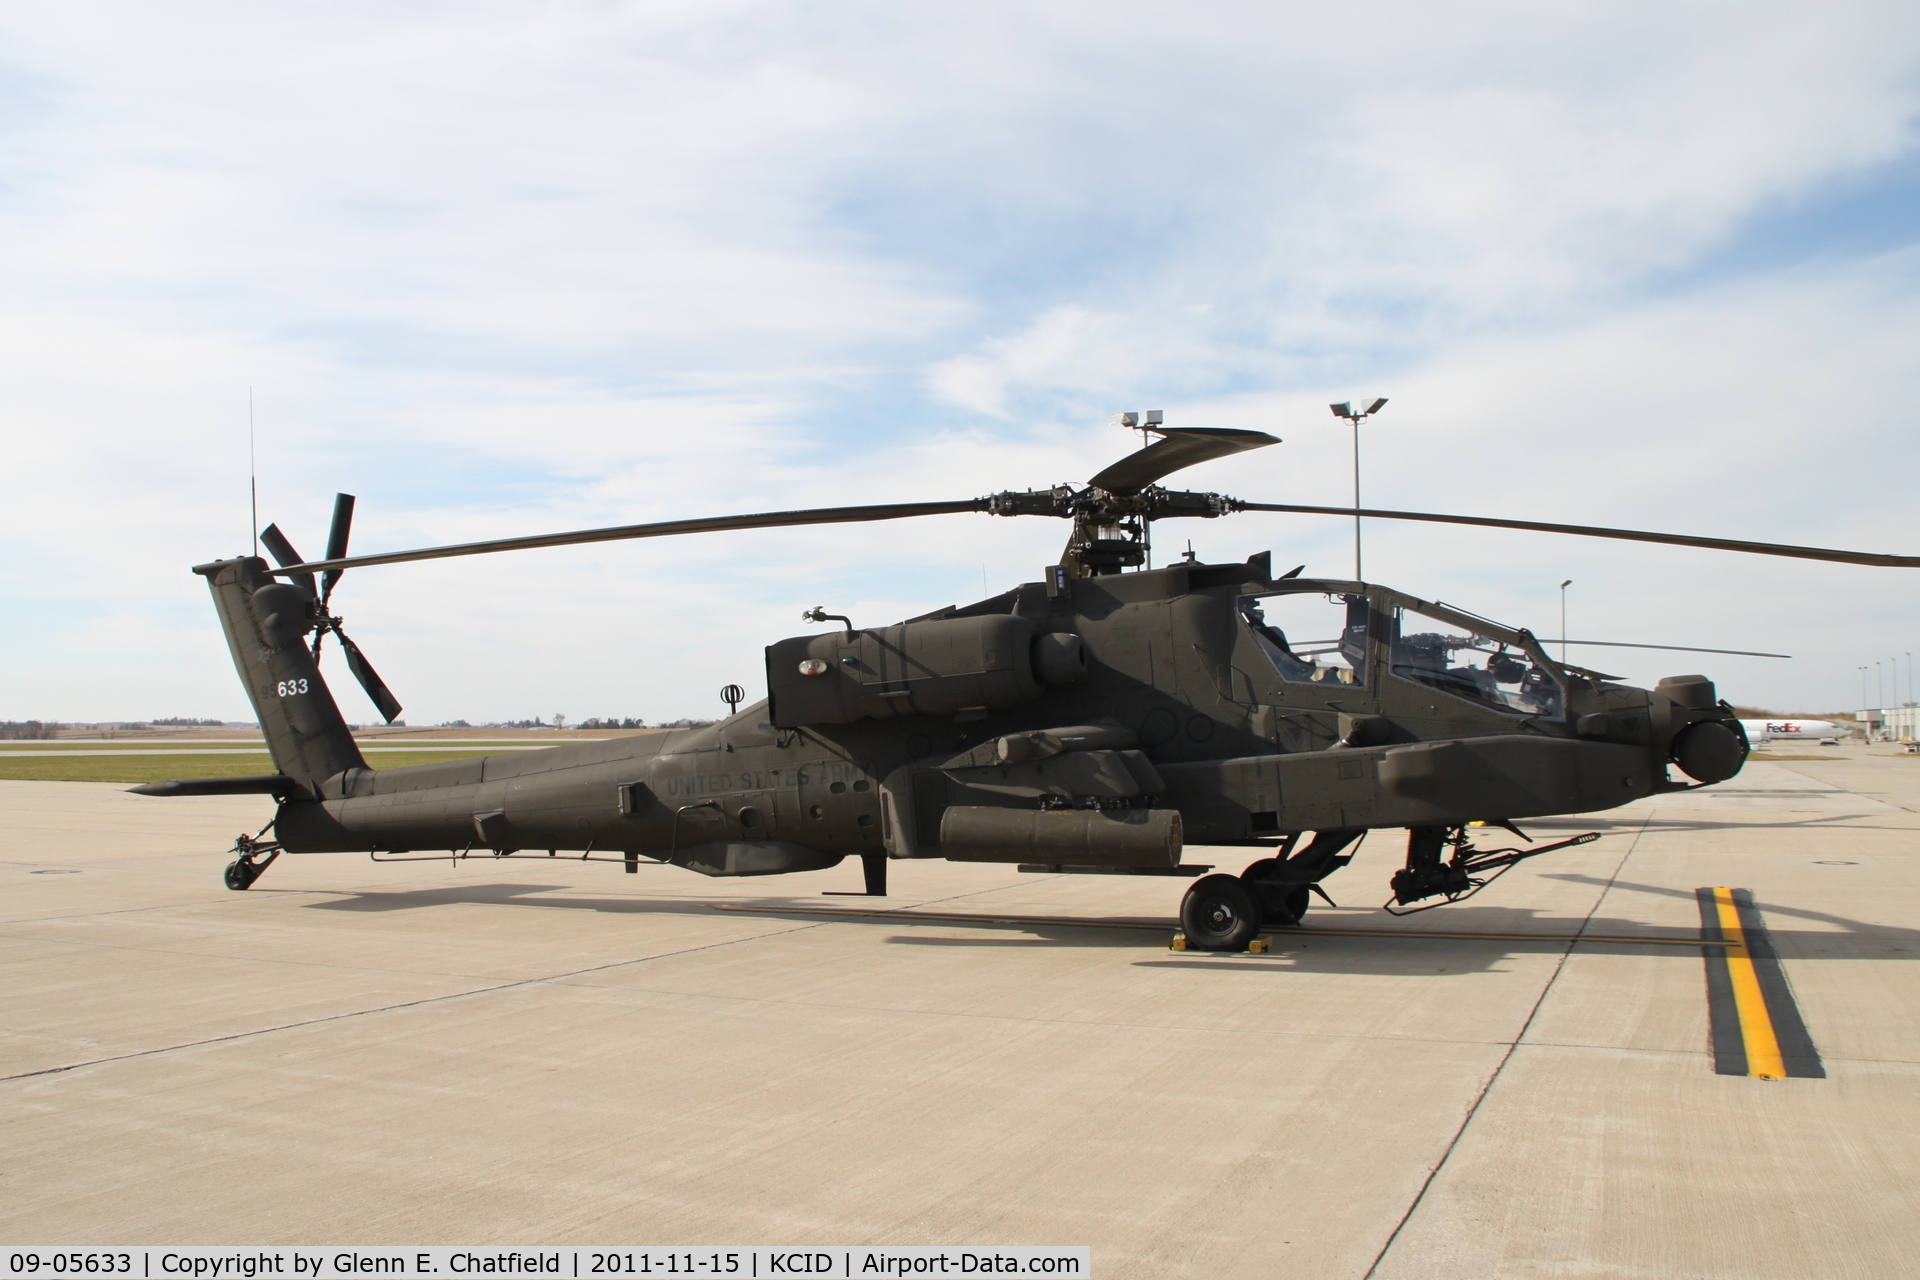 09-05633, 2011 Boeing AH-64D Apache C/N PVD633, Parked on the PS Air ramp.  Refueling stop on the way from Pennsylvania to Utah.